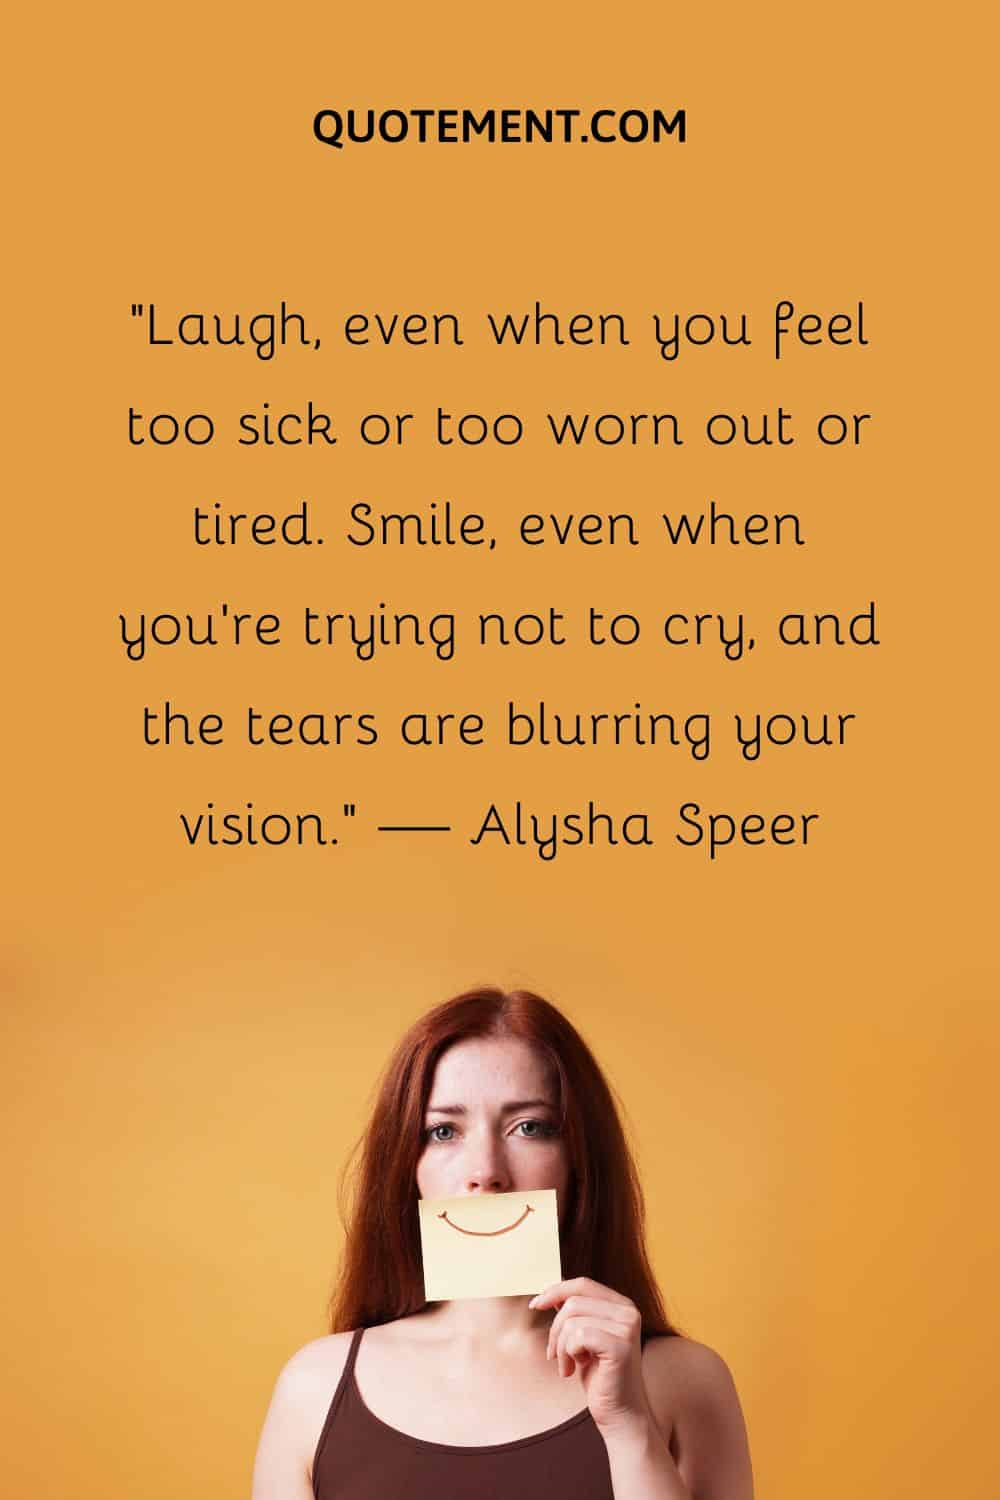 Laugh, even when you feel too sick or too worn out or tired.